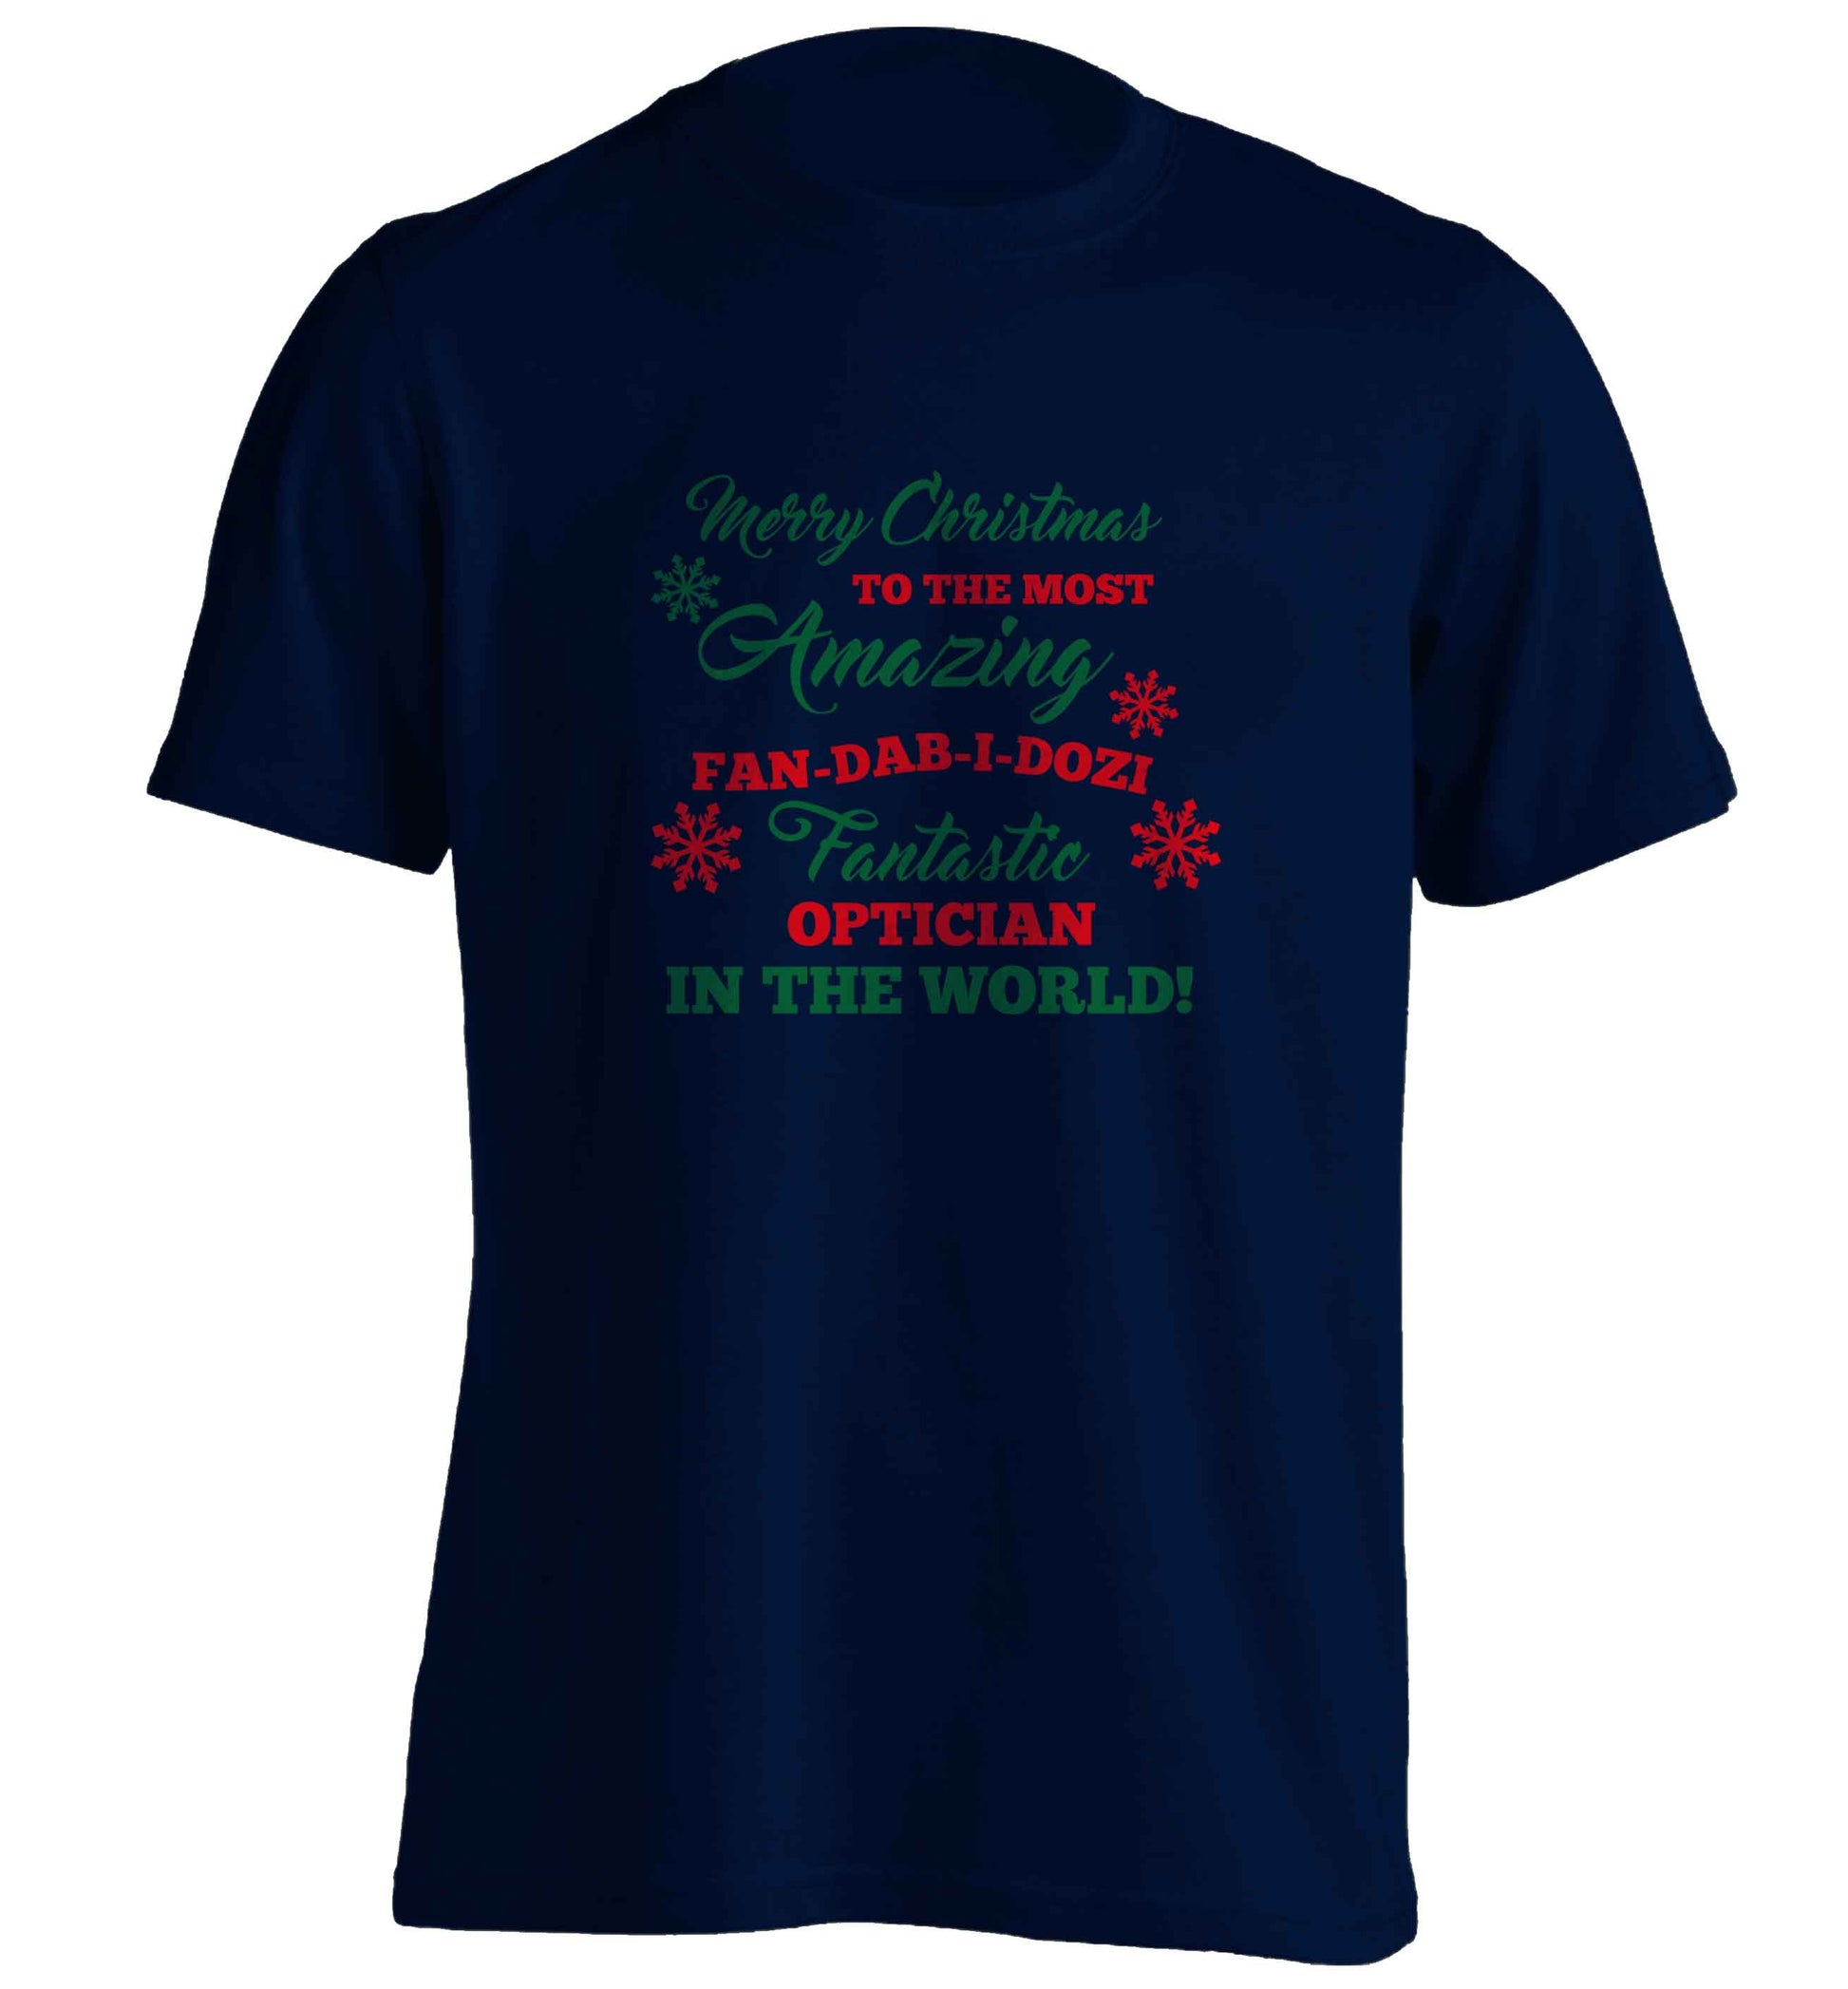 Merry Christmas to the most amazing optician in the world! adults unisex navy Tshirt 2XL